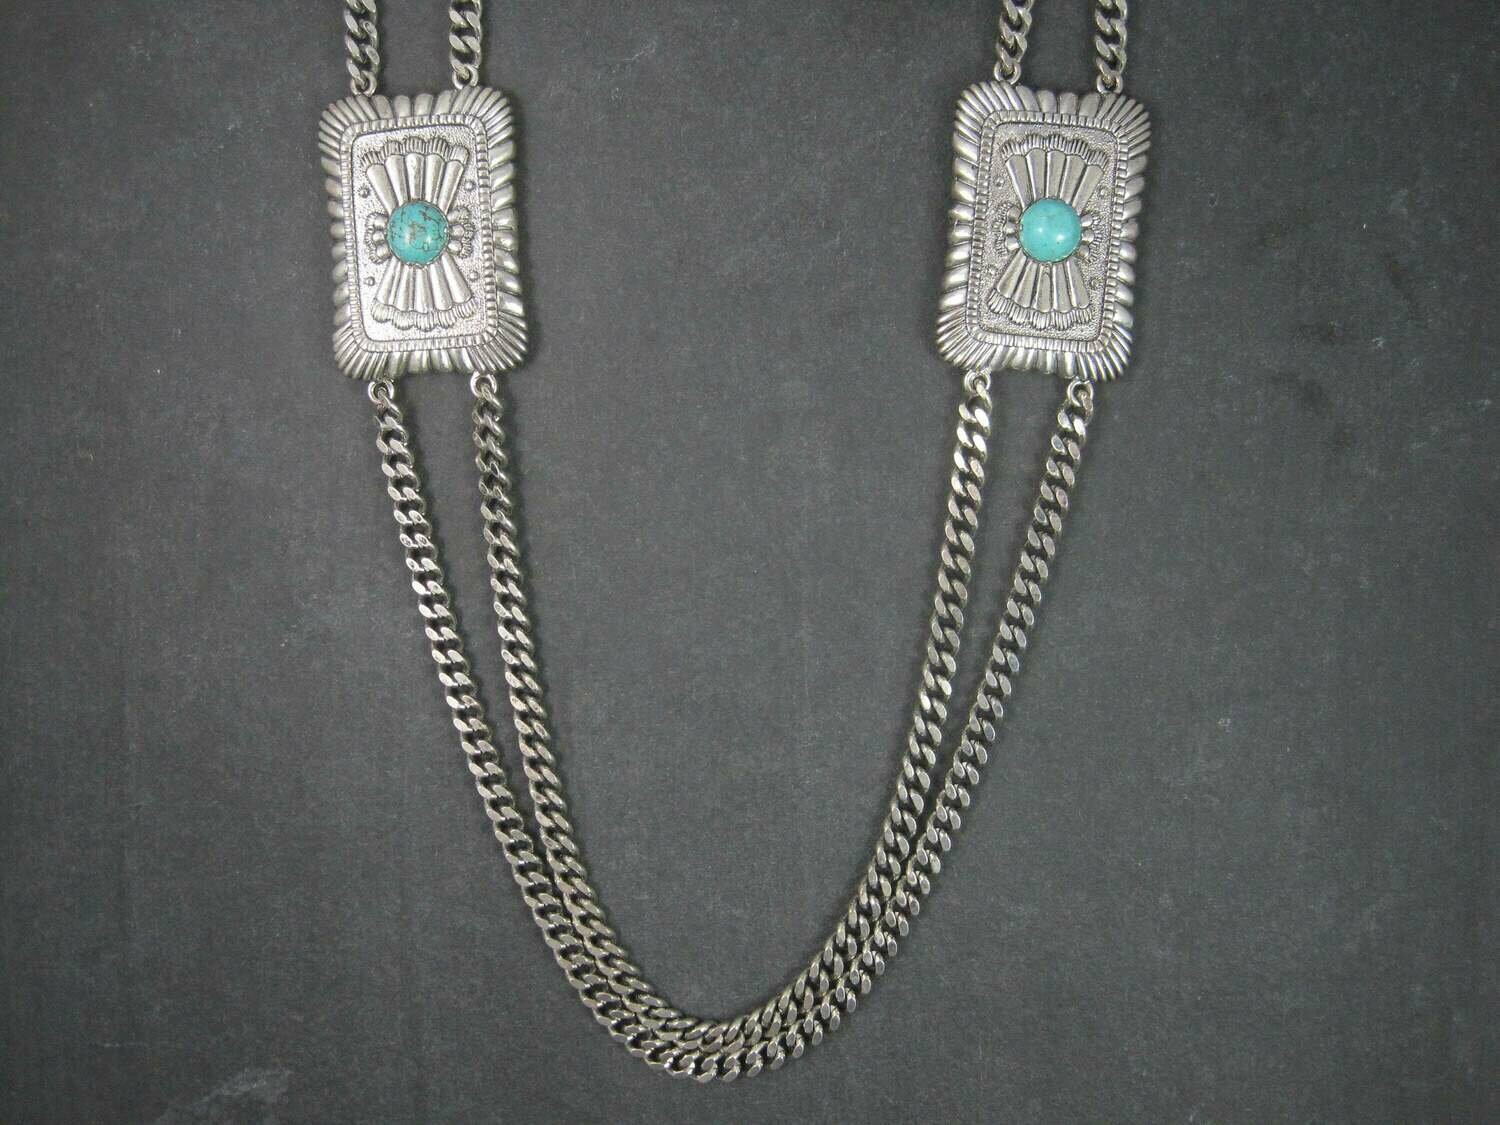 Heavy Southwestern Faux Turquoise Necklace 33 Inches